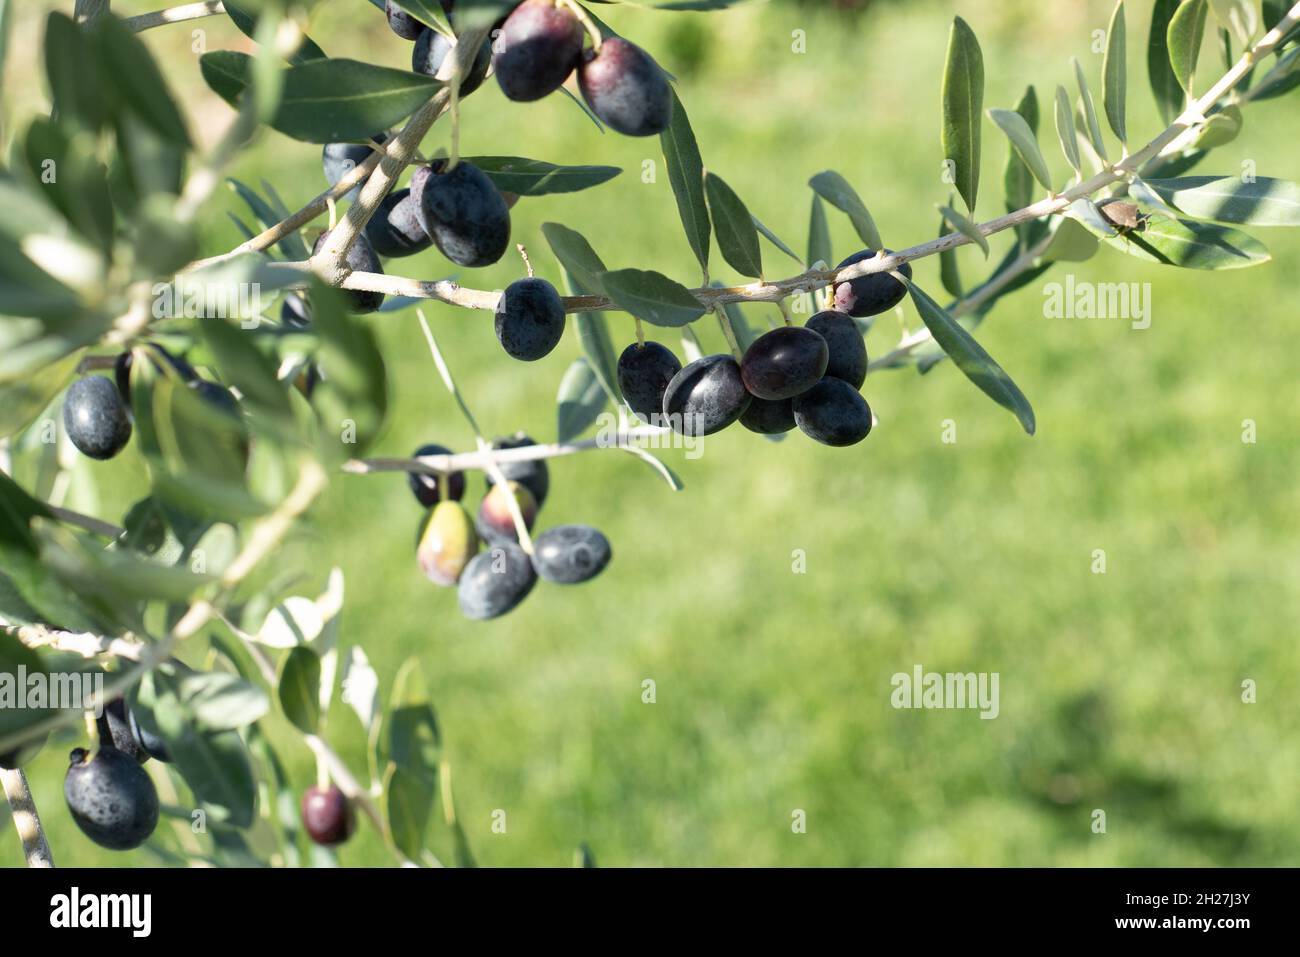 Olive tree branch with ripe fruits. Black olives and green leaves in the foreground against green background. Cpy space Stock Photo